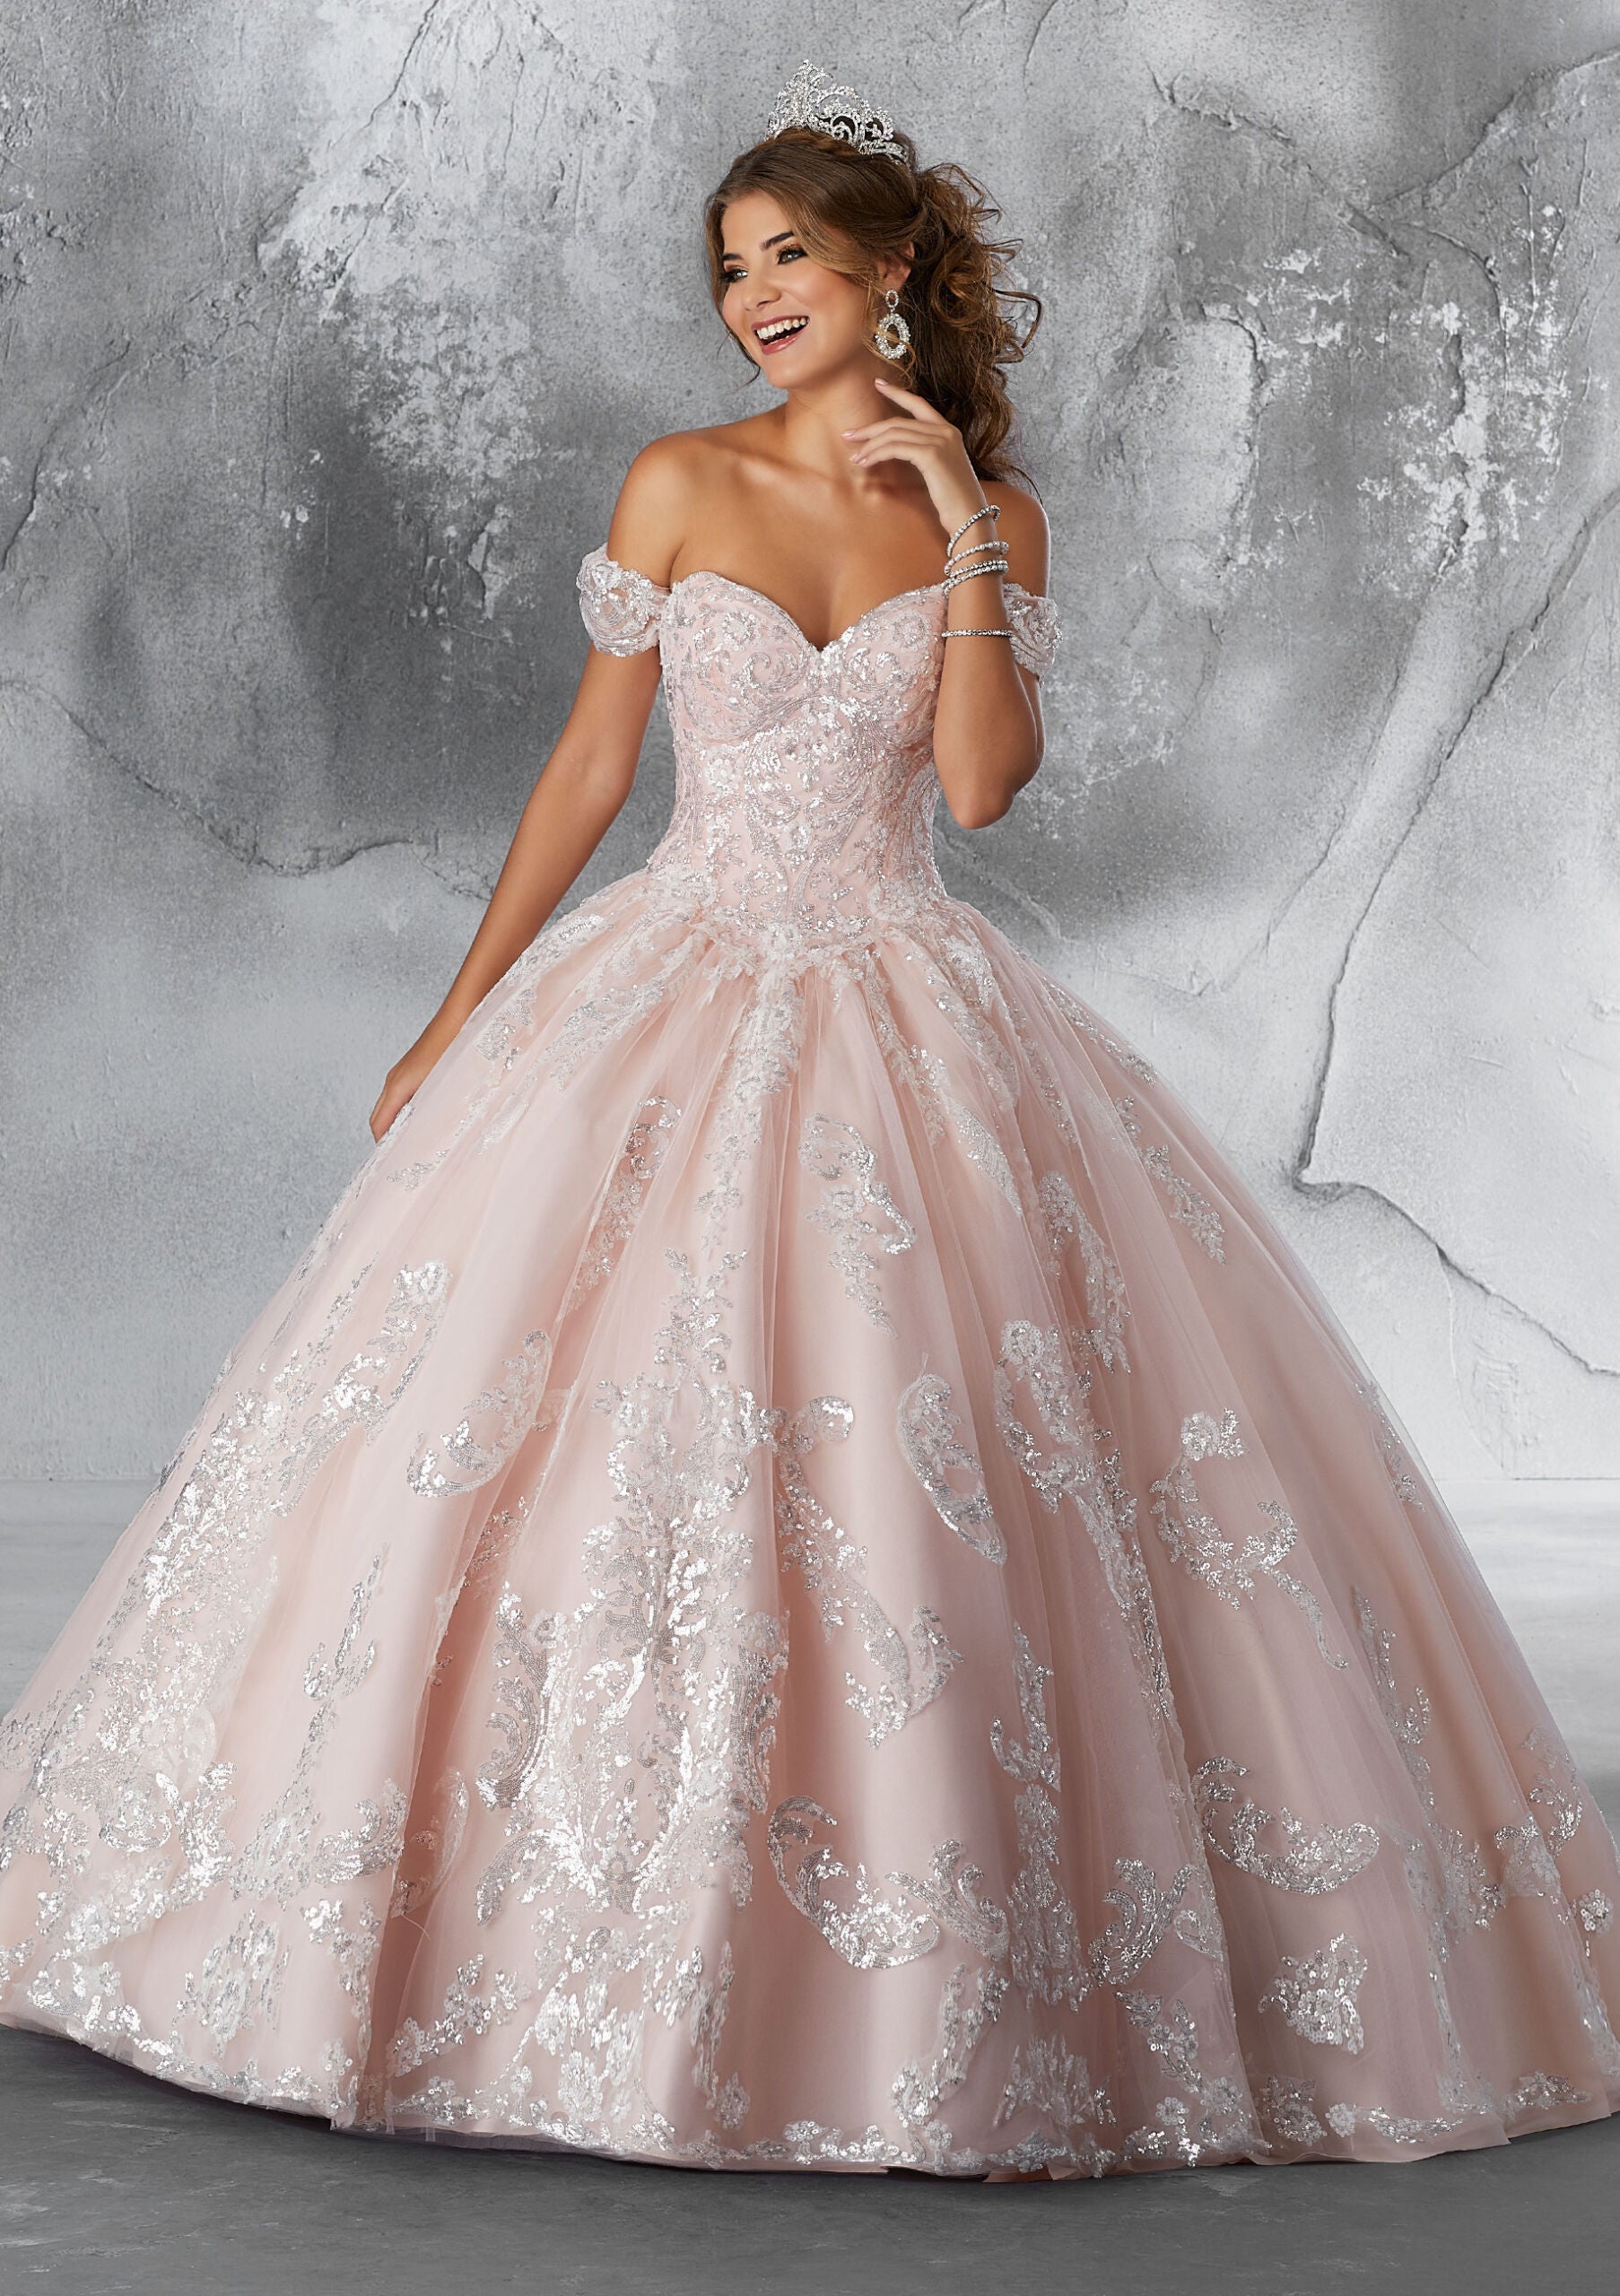 Patterned Sequins on a Tulle Ballgown with Detachable Sleeves